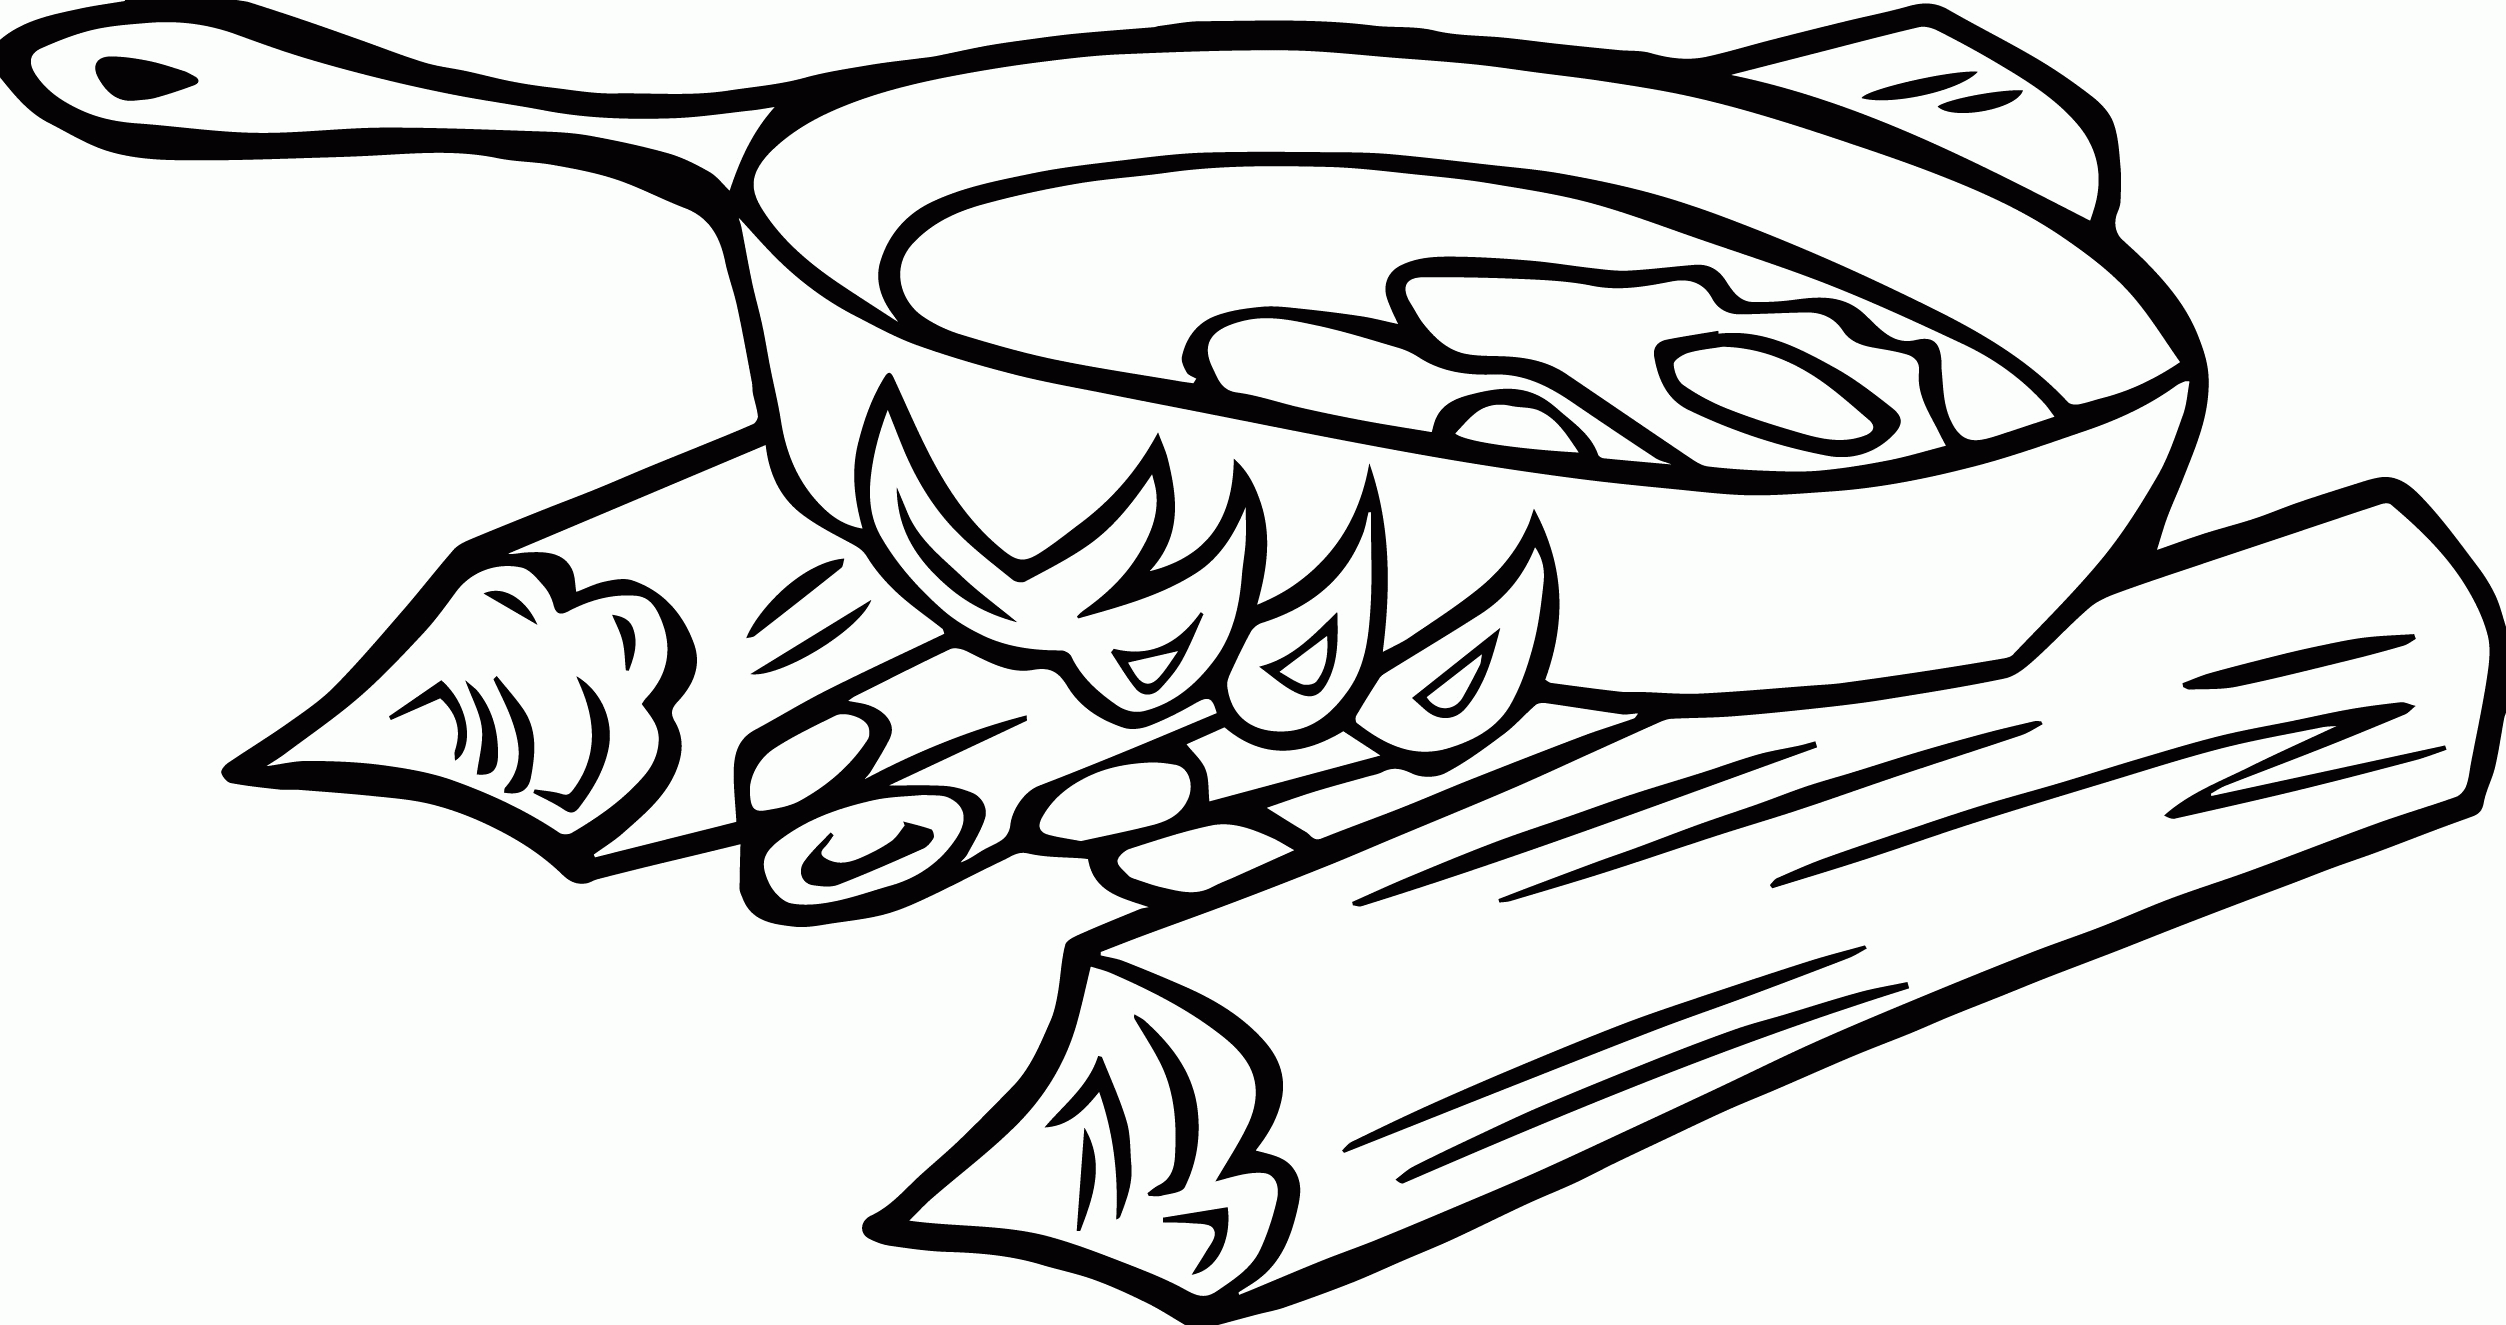 Campfire Cooking Coloring Page